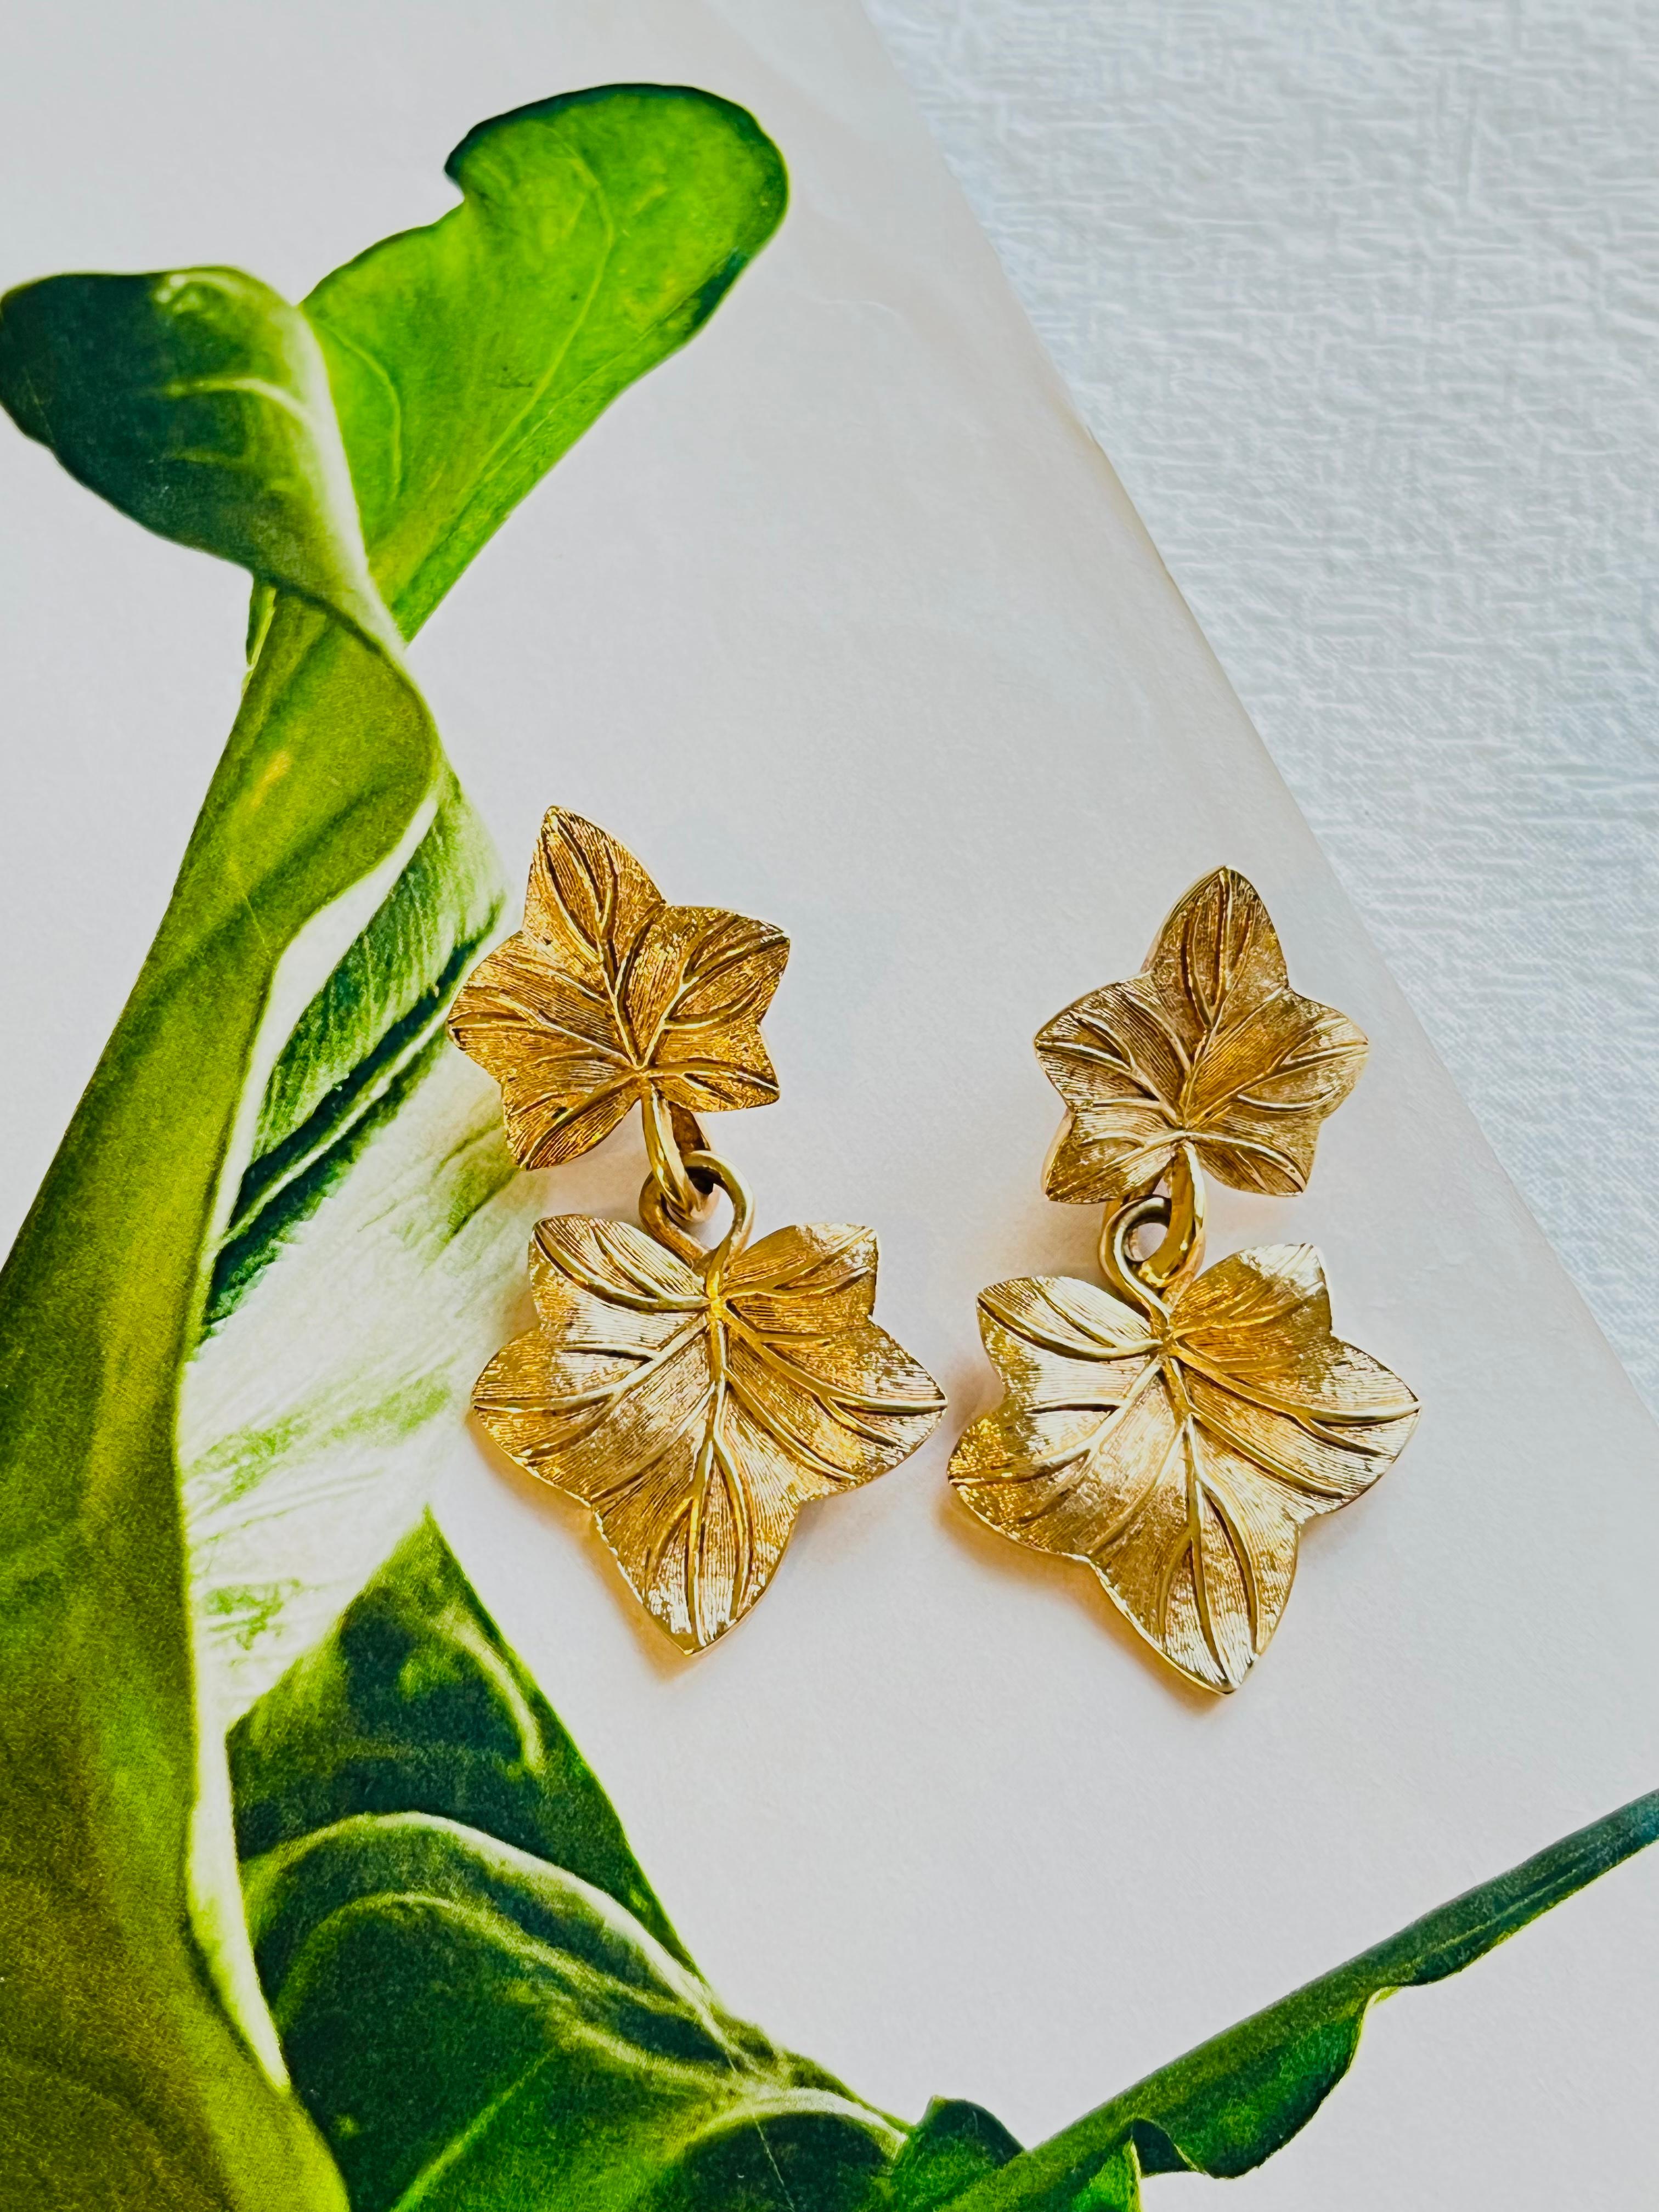 Christian Dior Vintage 1970s Textured Double Maple Leaf Drop Pierced Earrings, Gold Tone

Very excellent condition. 100% Genuine. Rare to find.

A very beautiful pair of earrings by Chr. DIOR, signed at the back.

Size: 5.0*2.8 cm.

Weight: 8.0